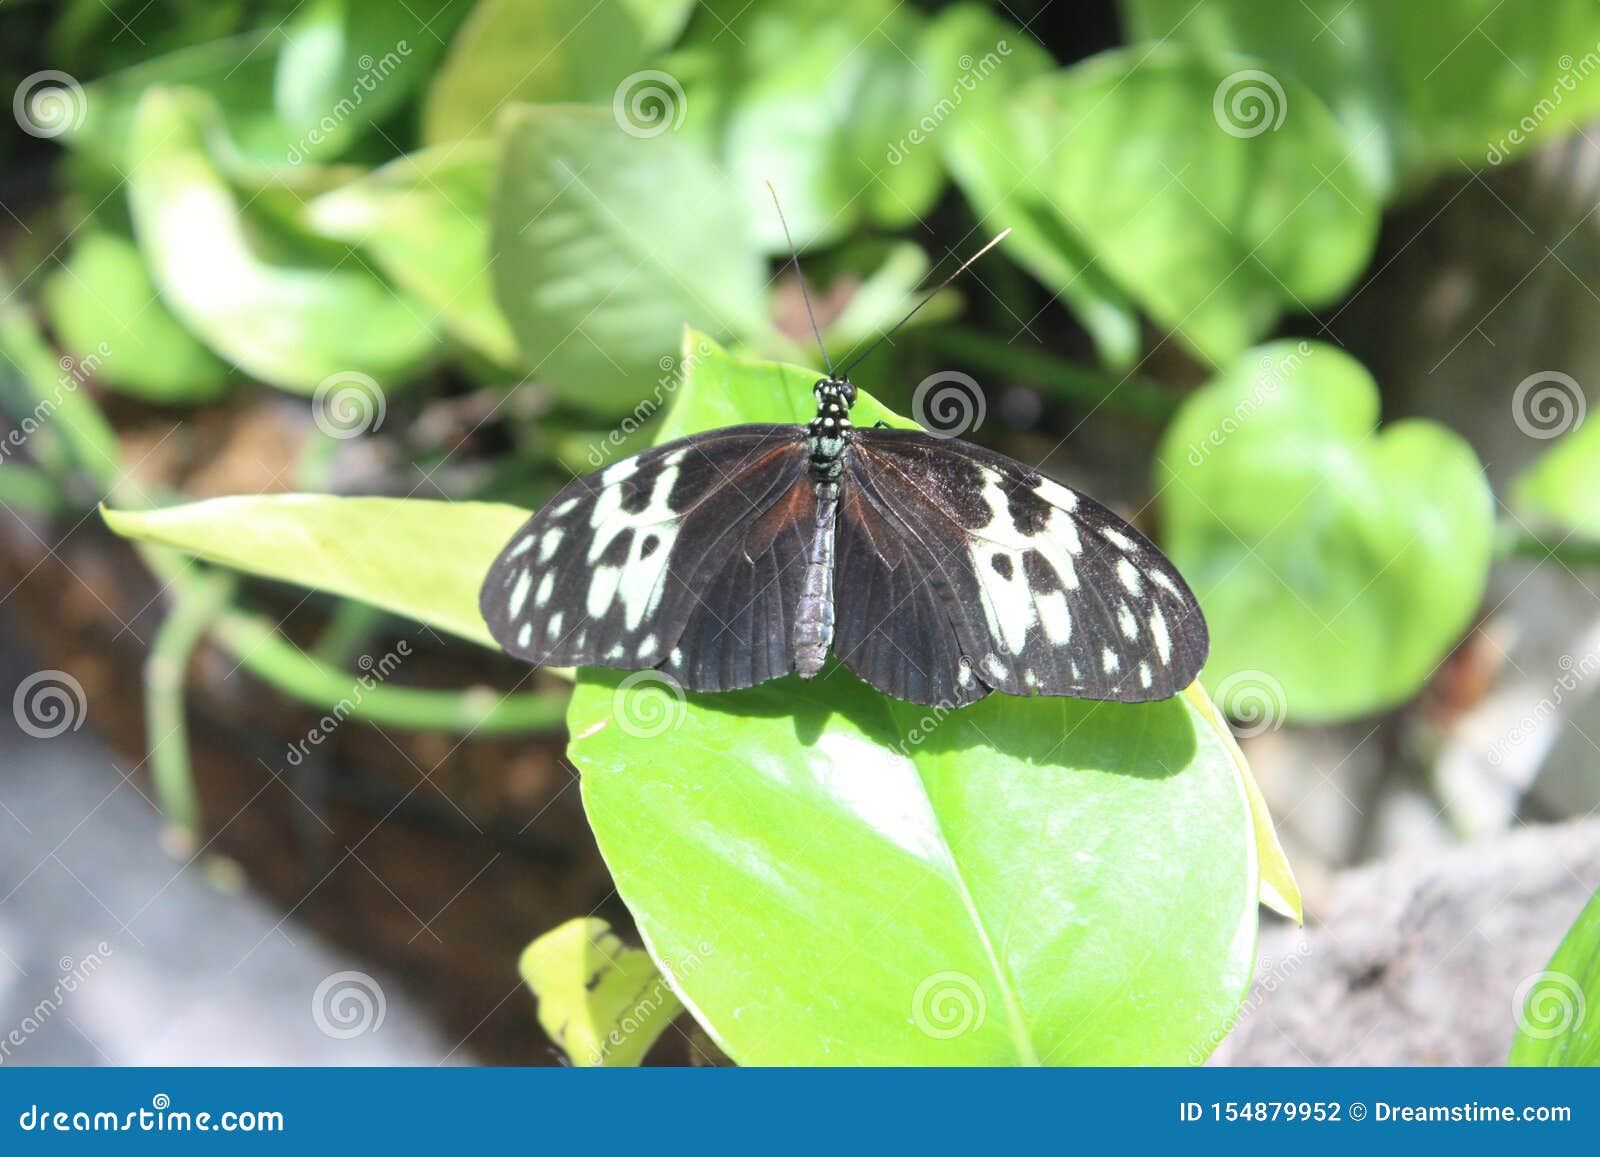 Butterfly Conservatory Near Niagara Falls In Canada Stock Photo   Image ...